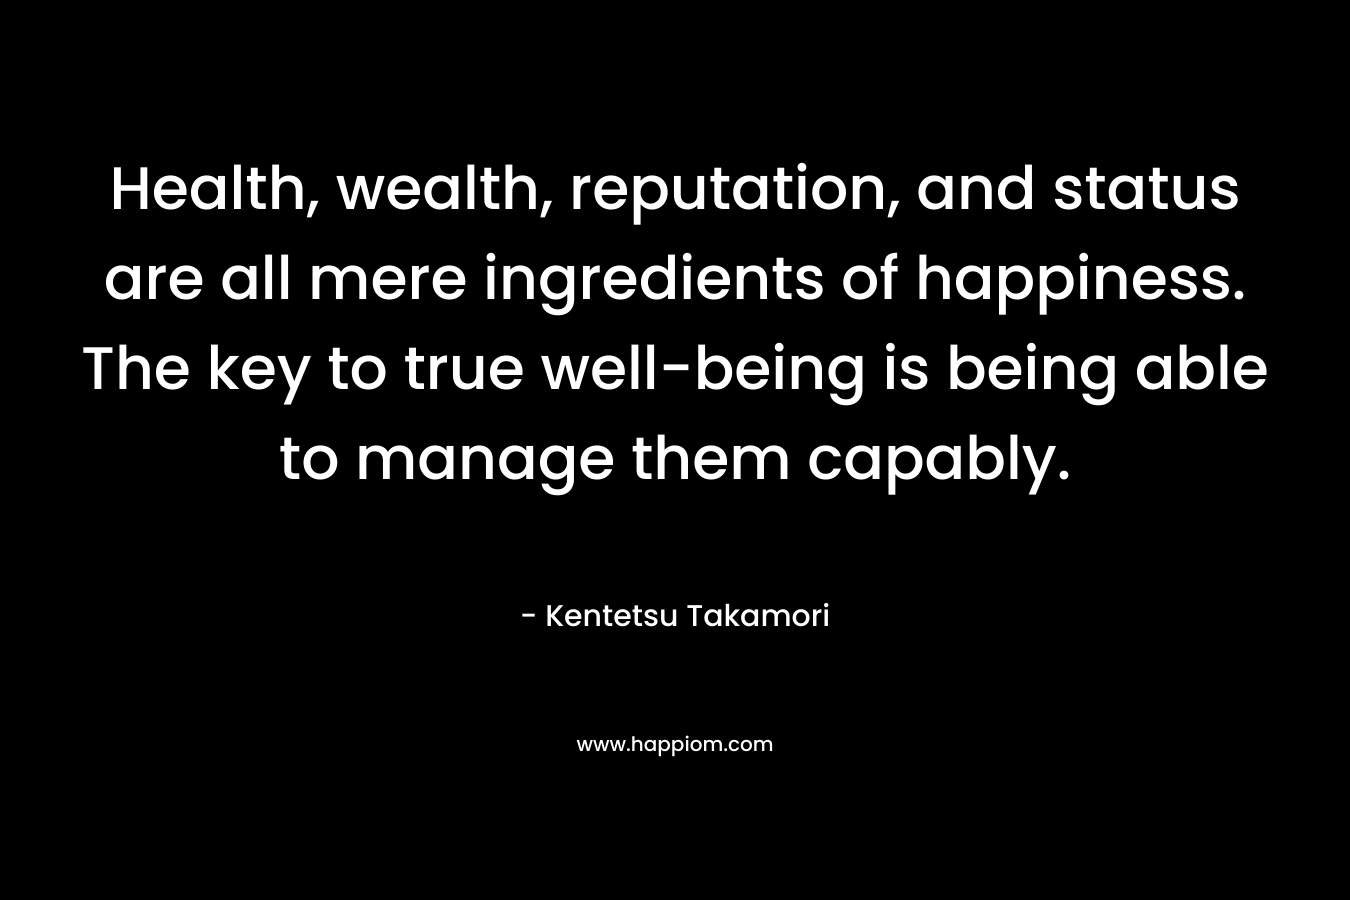 Health, wealth, reputation, and status are all mere ingredients of happiness. The key to true well-being is being able to manage them capably. – Kentetsu Takamori